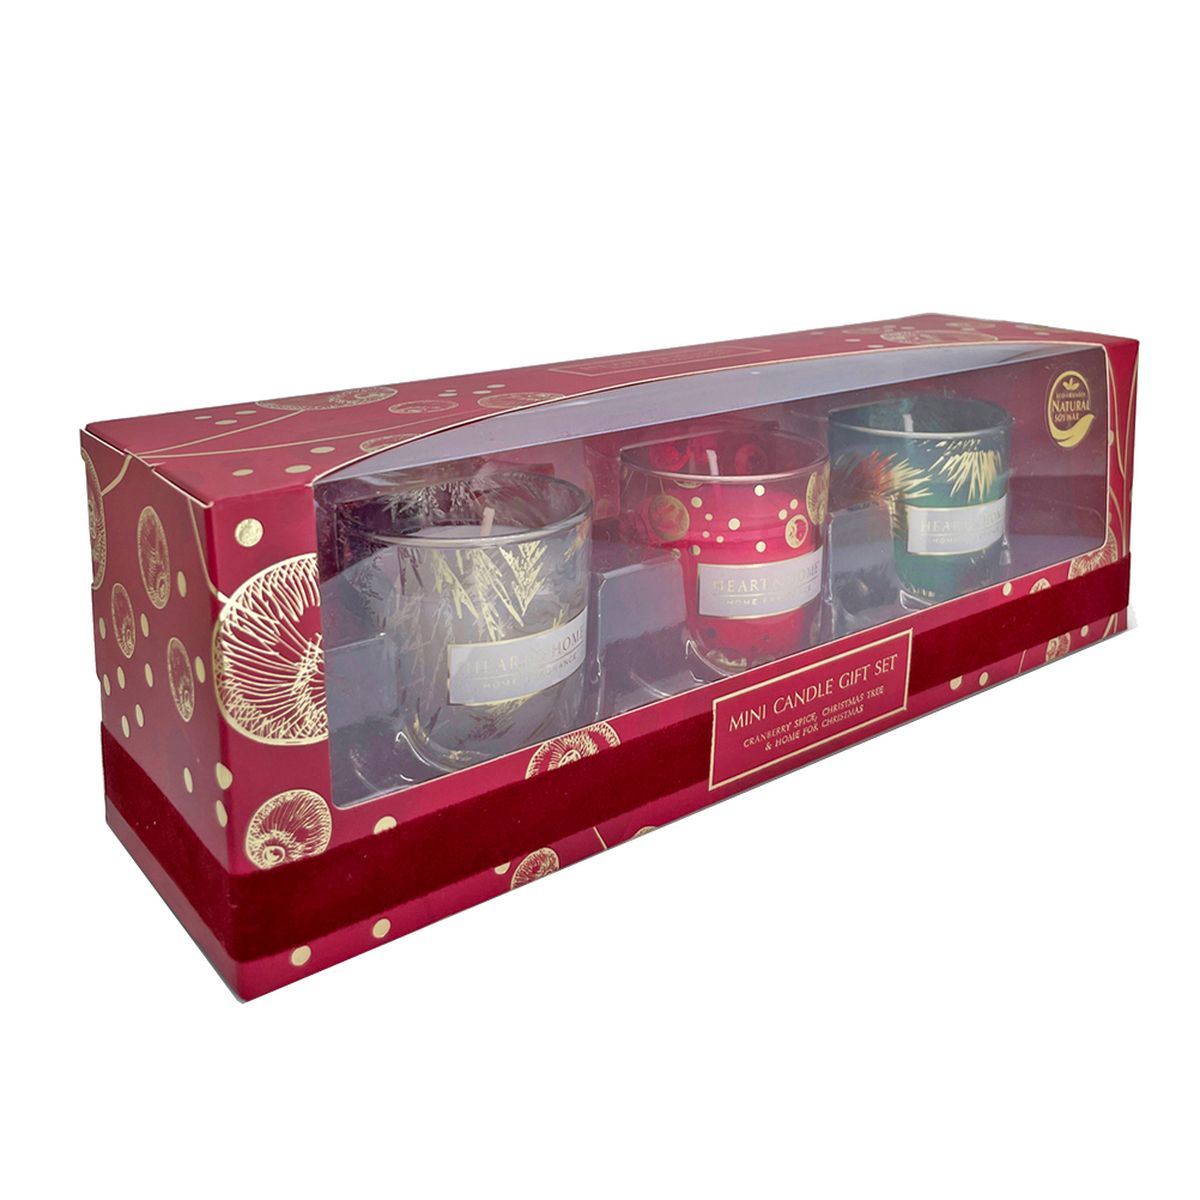 Gift box 3 Votives Heart and Home candles - Christmas